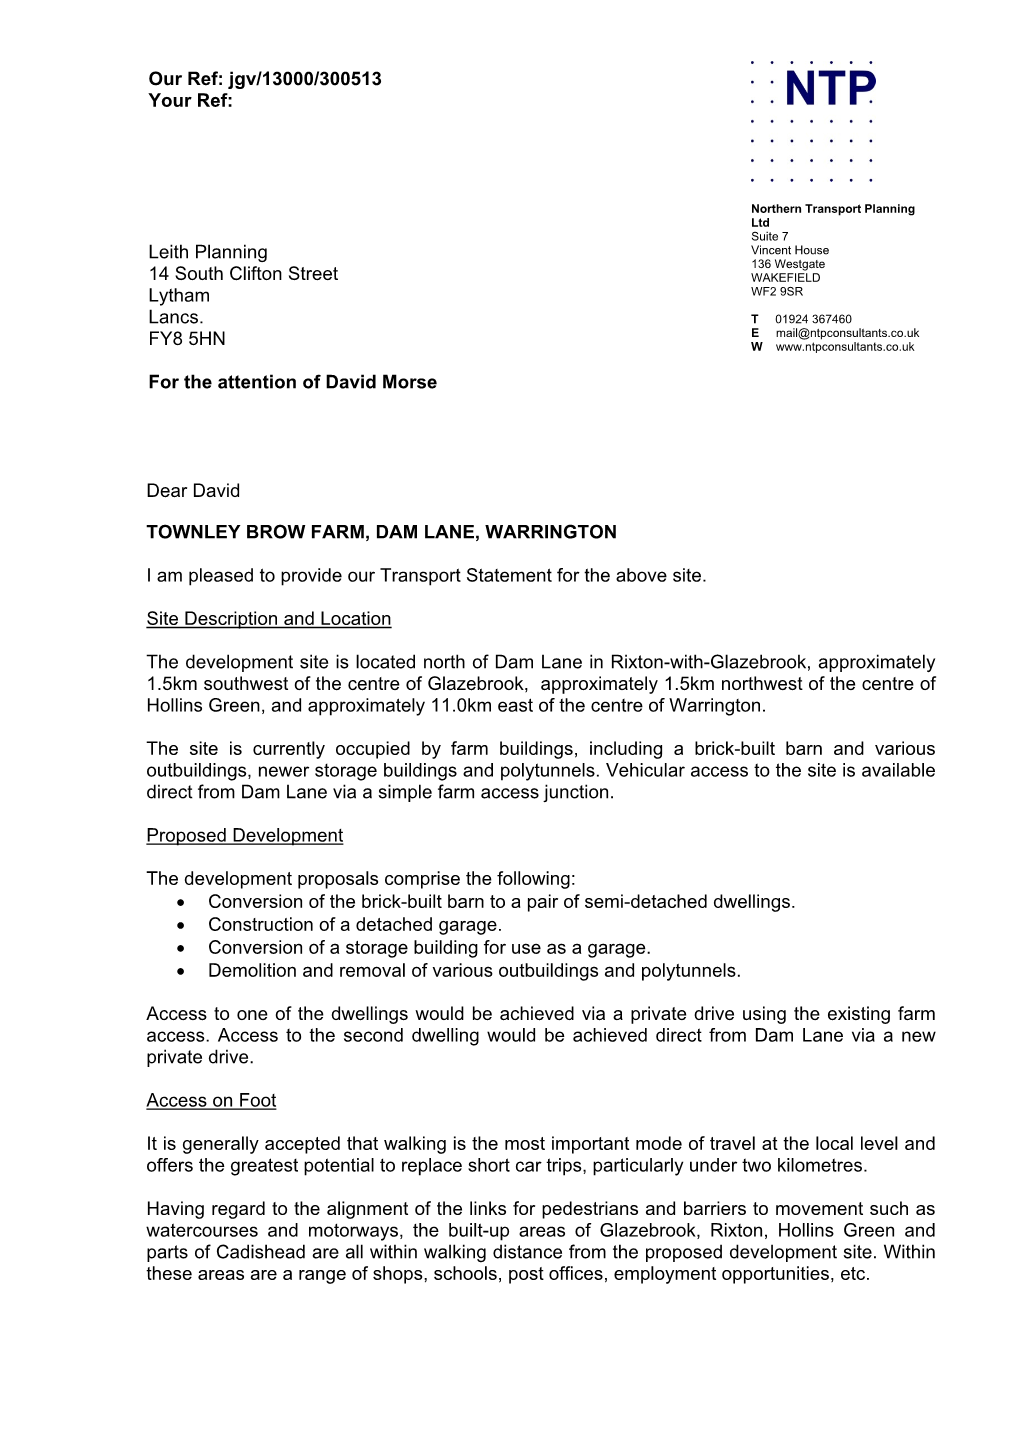 Dear David TOWNLEY BROW FARM, DAM LANE, WARRINGTON I Am Pleased to Provide Our Transport Statement for the Above Site. Site Desc